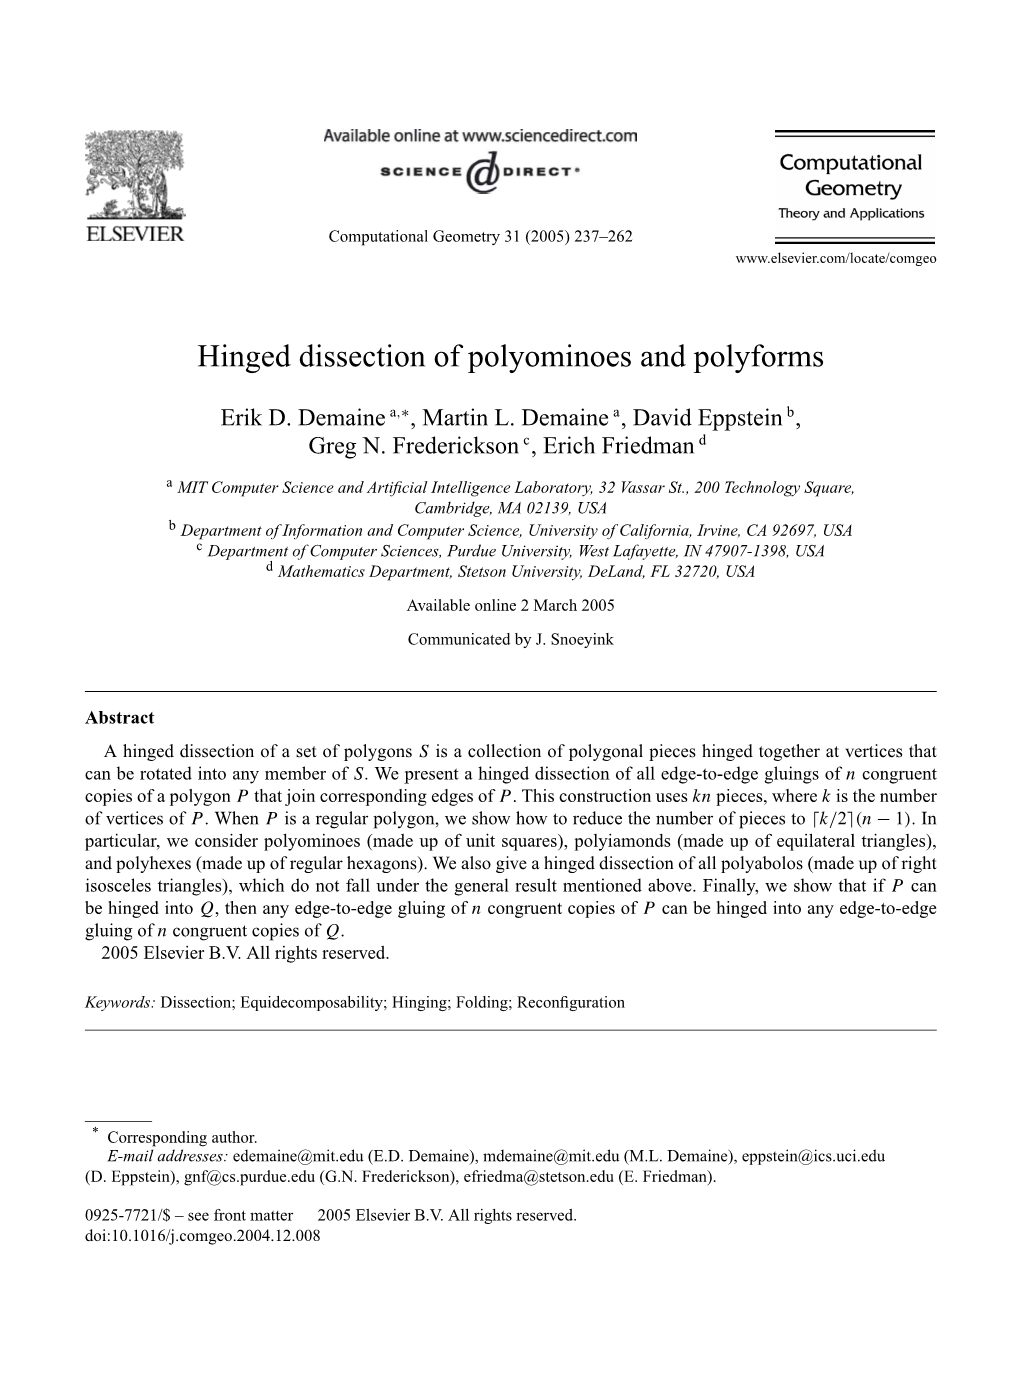 Hinged Dissection of Polyominoes and Polyforms